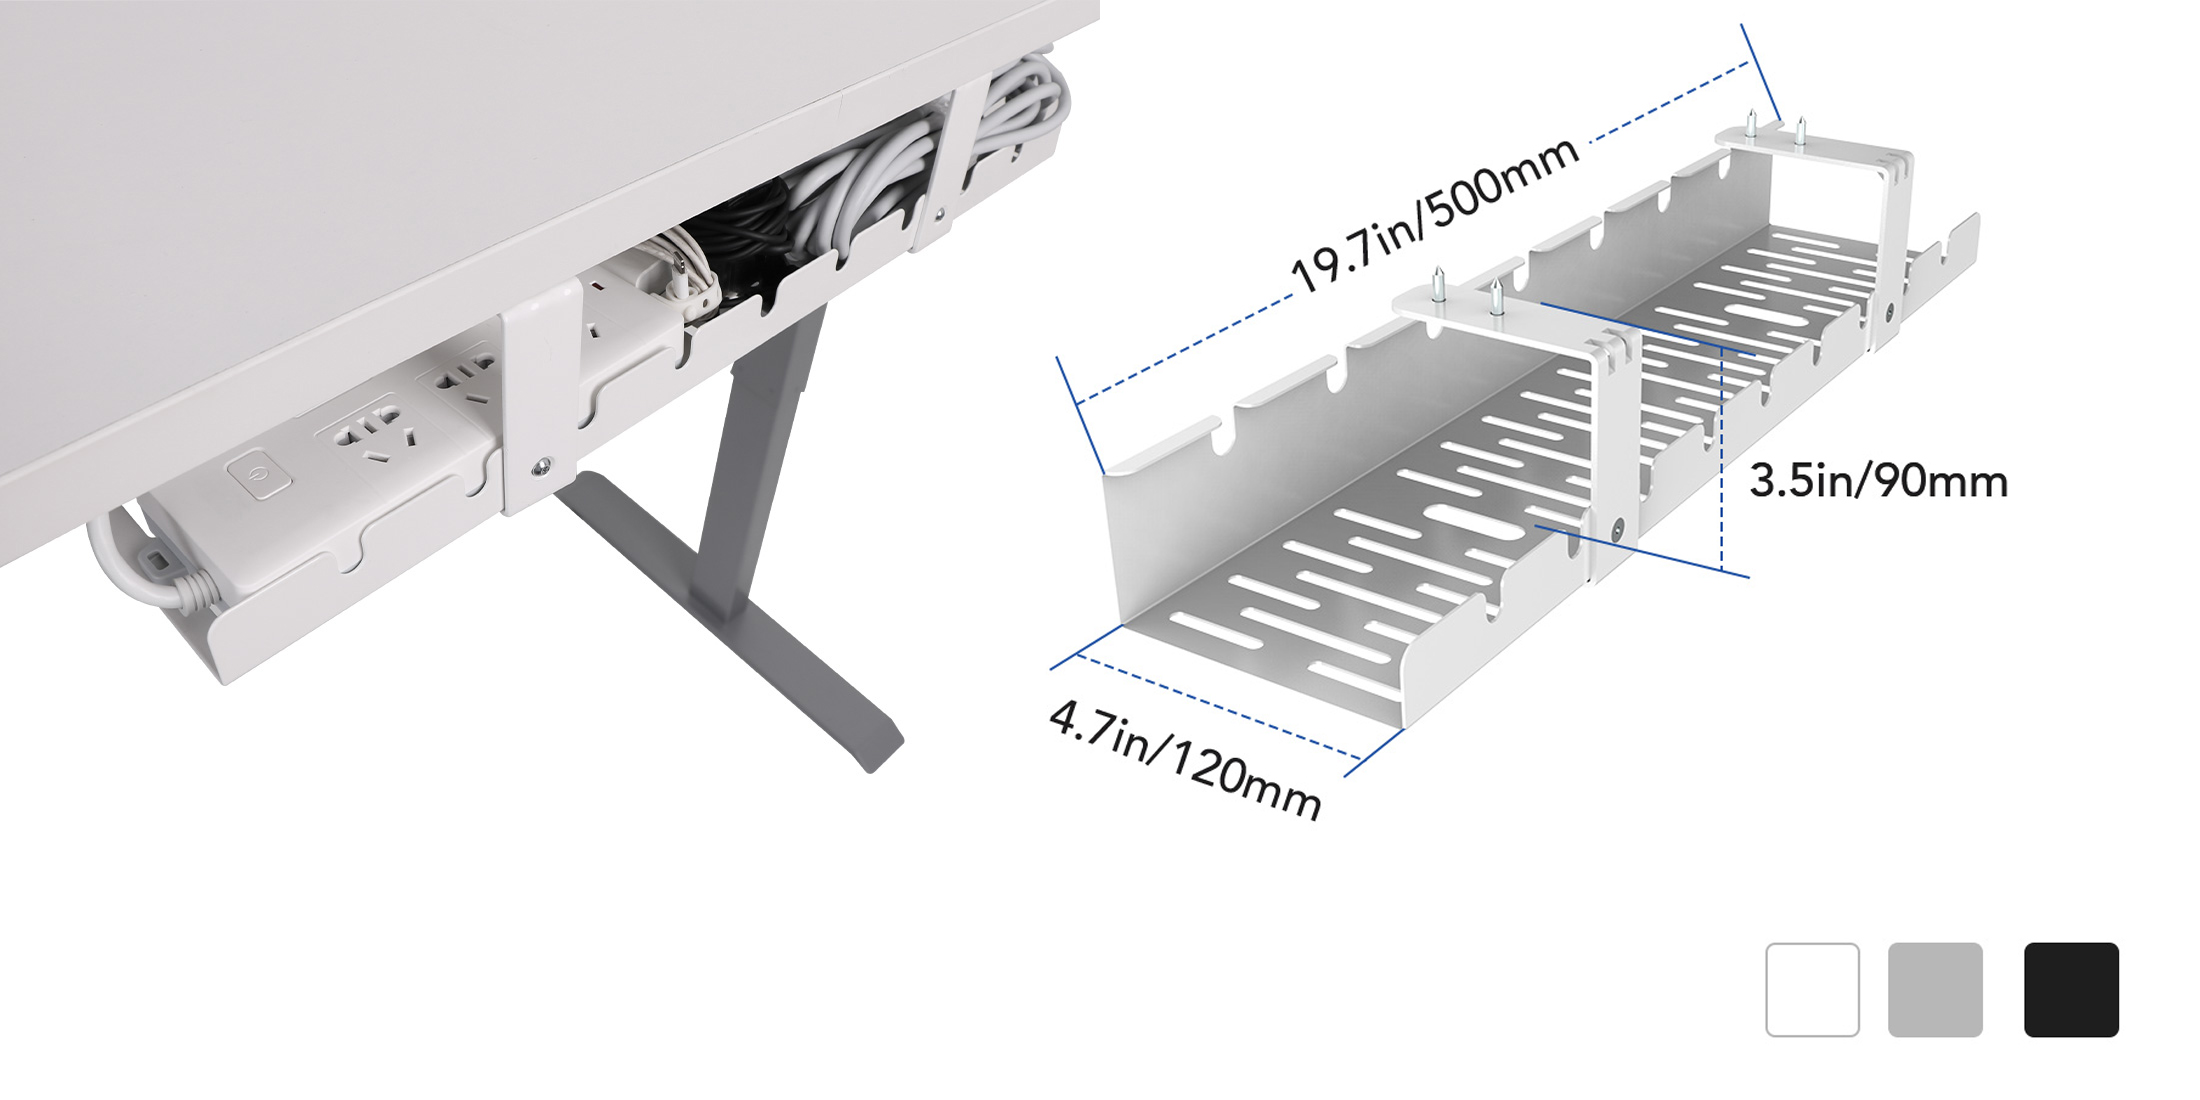 Cable Management Tray